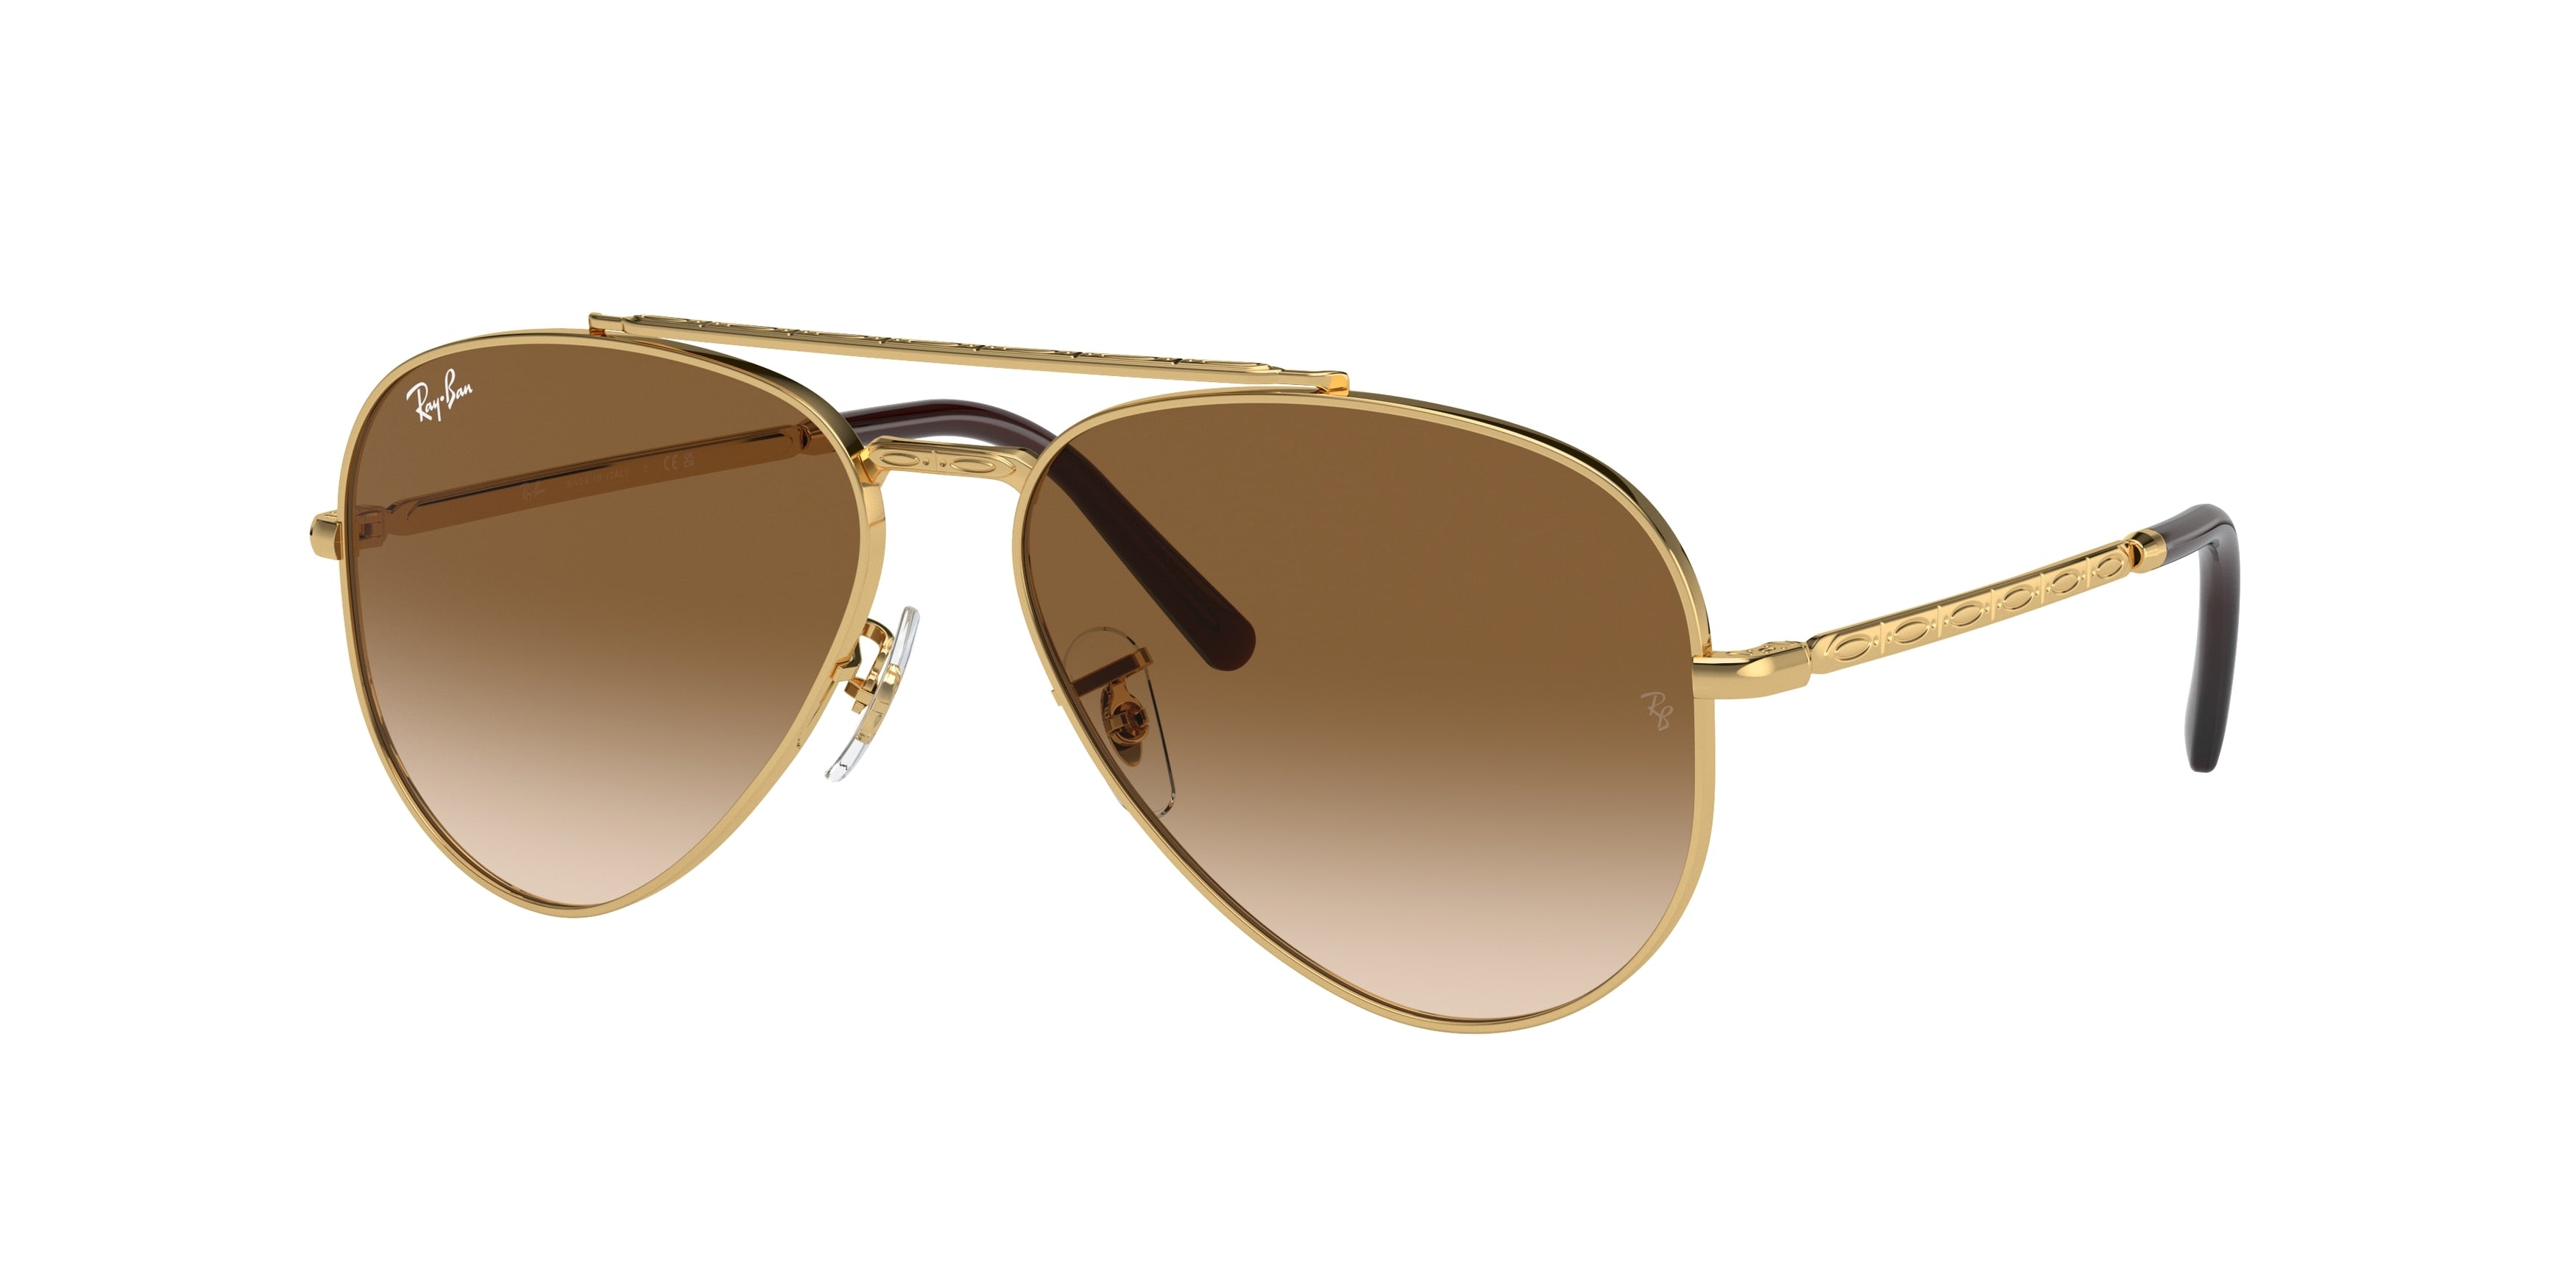 Ray-Ban™ New Aviator RB3625 001/51 58 - Gold - Unisex